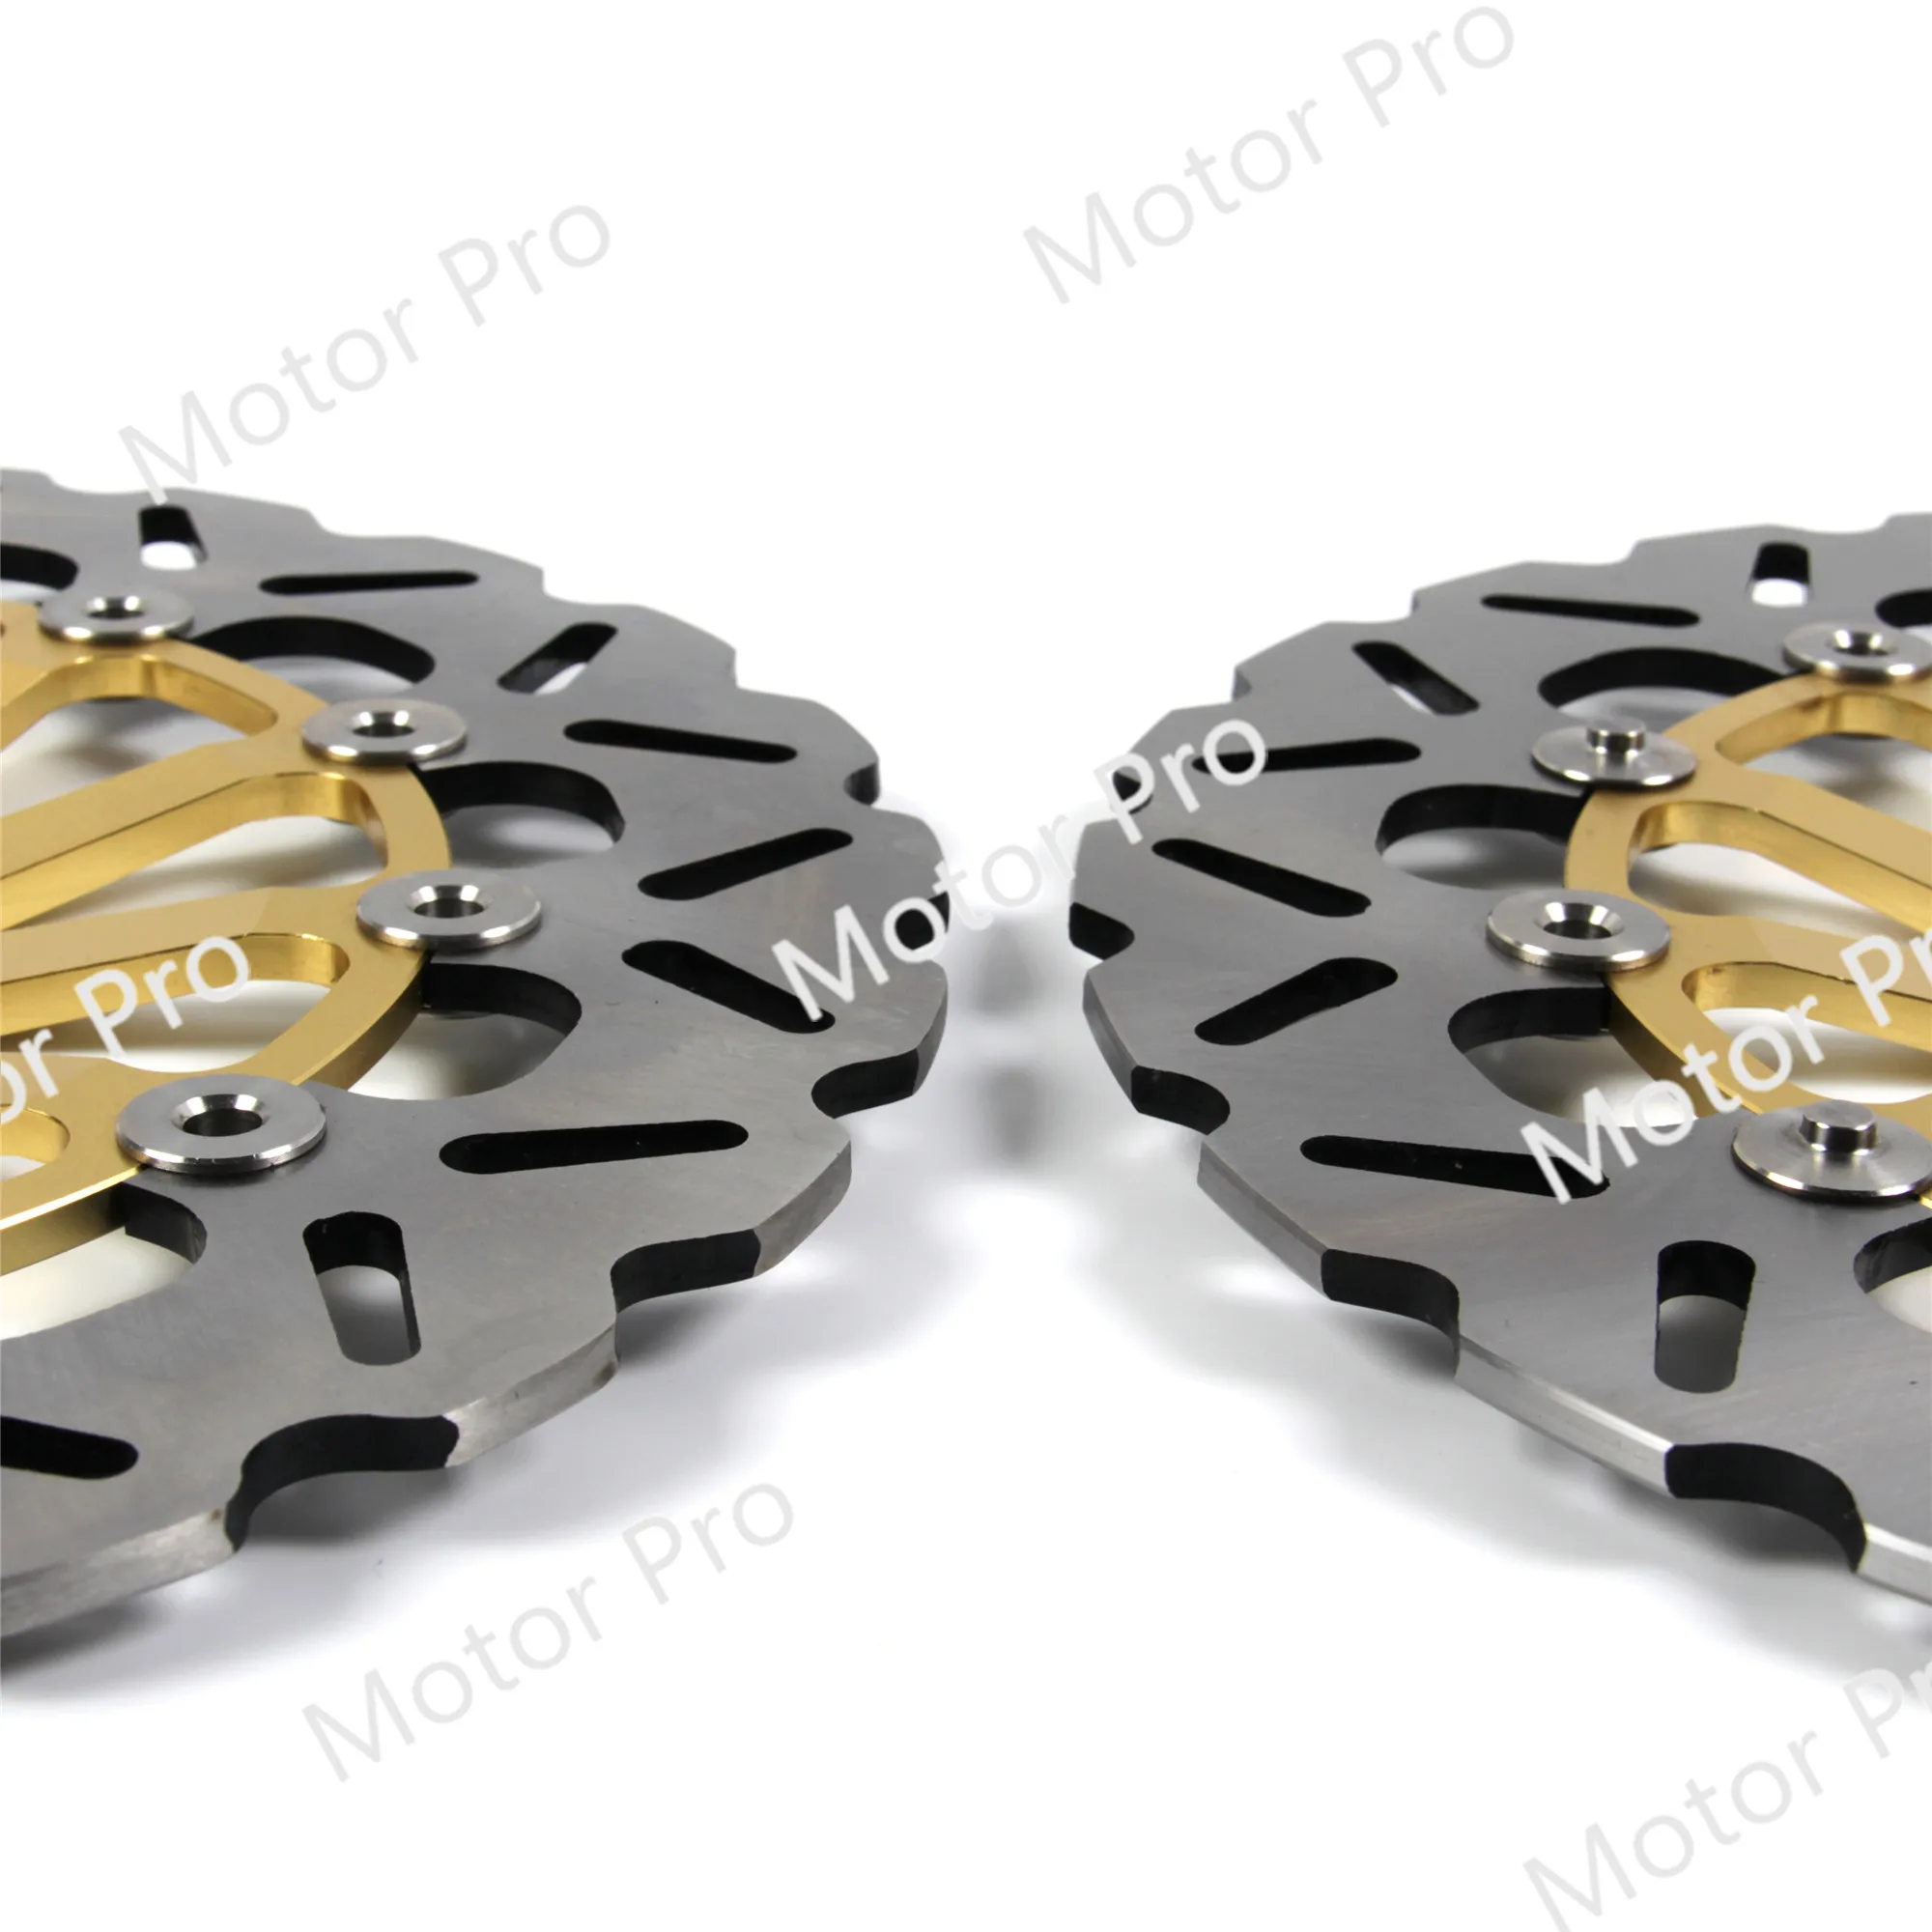 

2PCS CNC Floating Disk Front Brake Disc Rotor For DUCATI STREETFIGHTER 1200 2009 2010 2011 / 1098 S TRICOLORE 1100 2007 2008